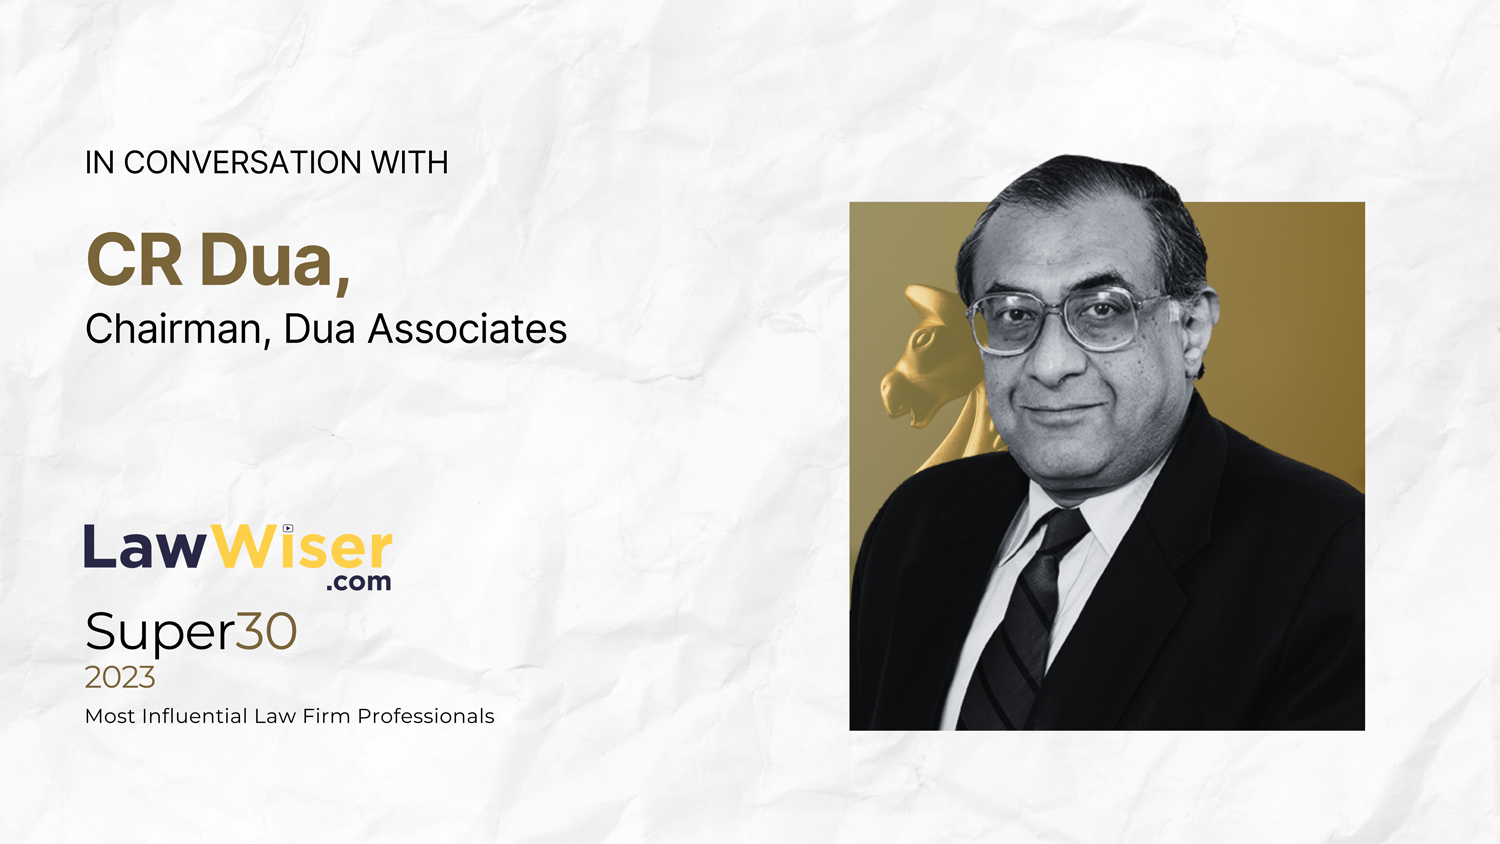 Here is a quick conversation with CR Dua, Chairman, Dua Associates, who was recently listed in LawWiser Super 30 – Most Influential Law firm Professionals